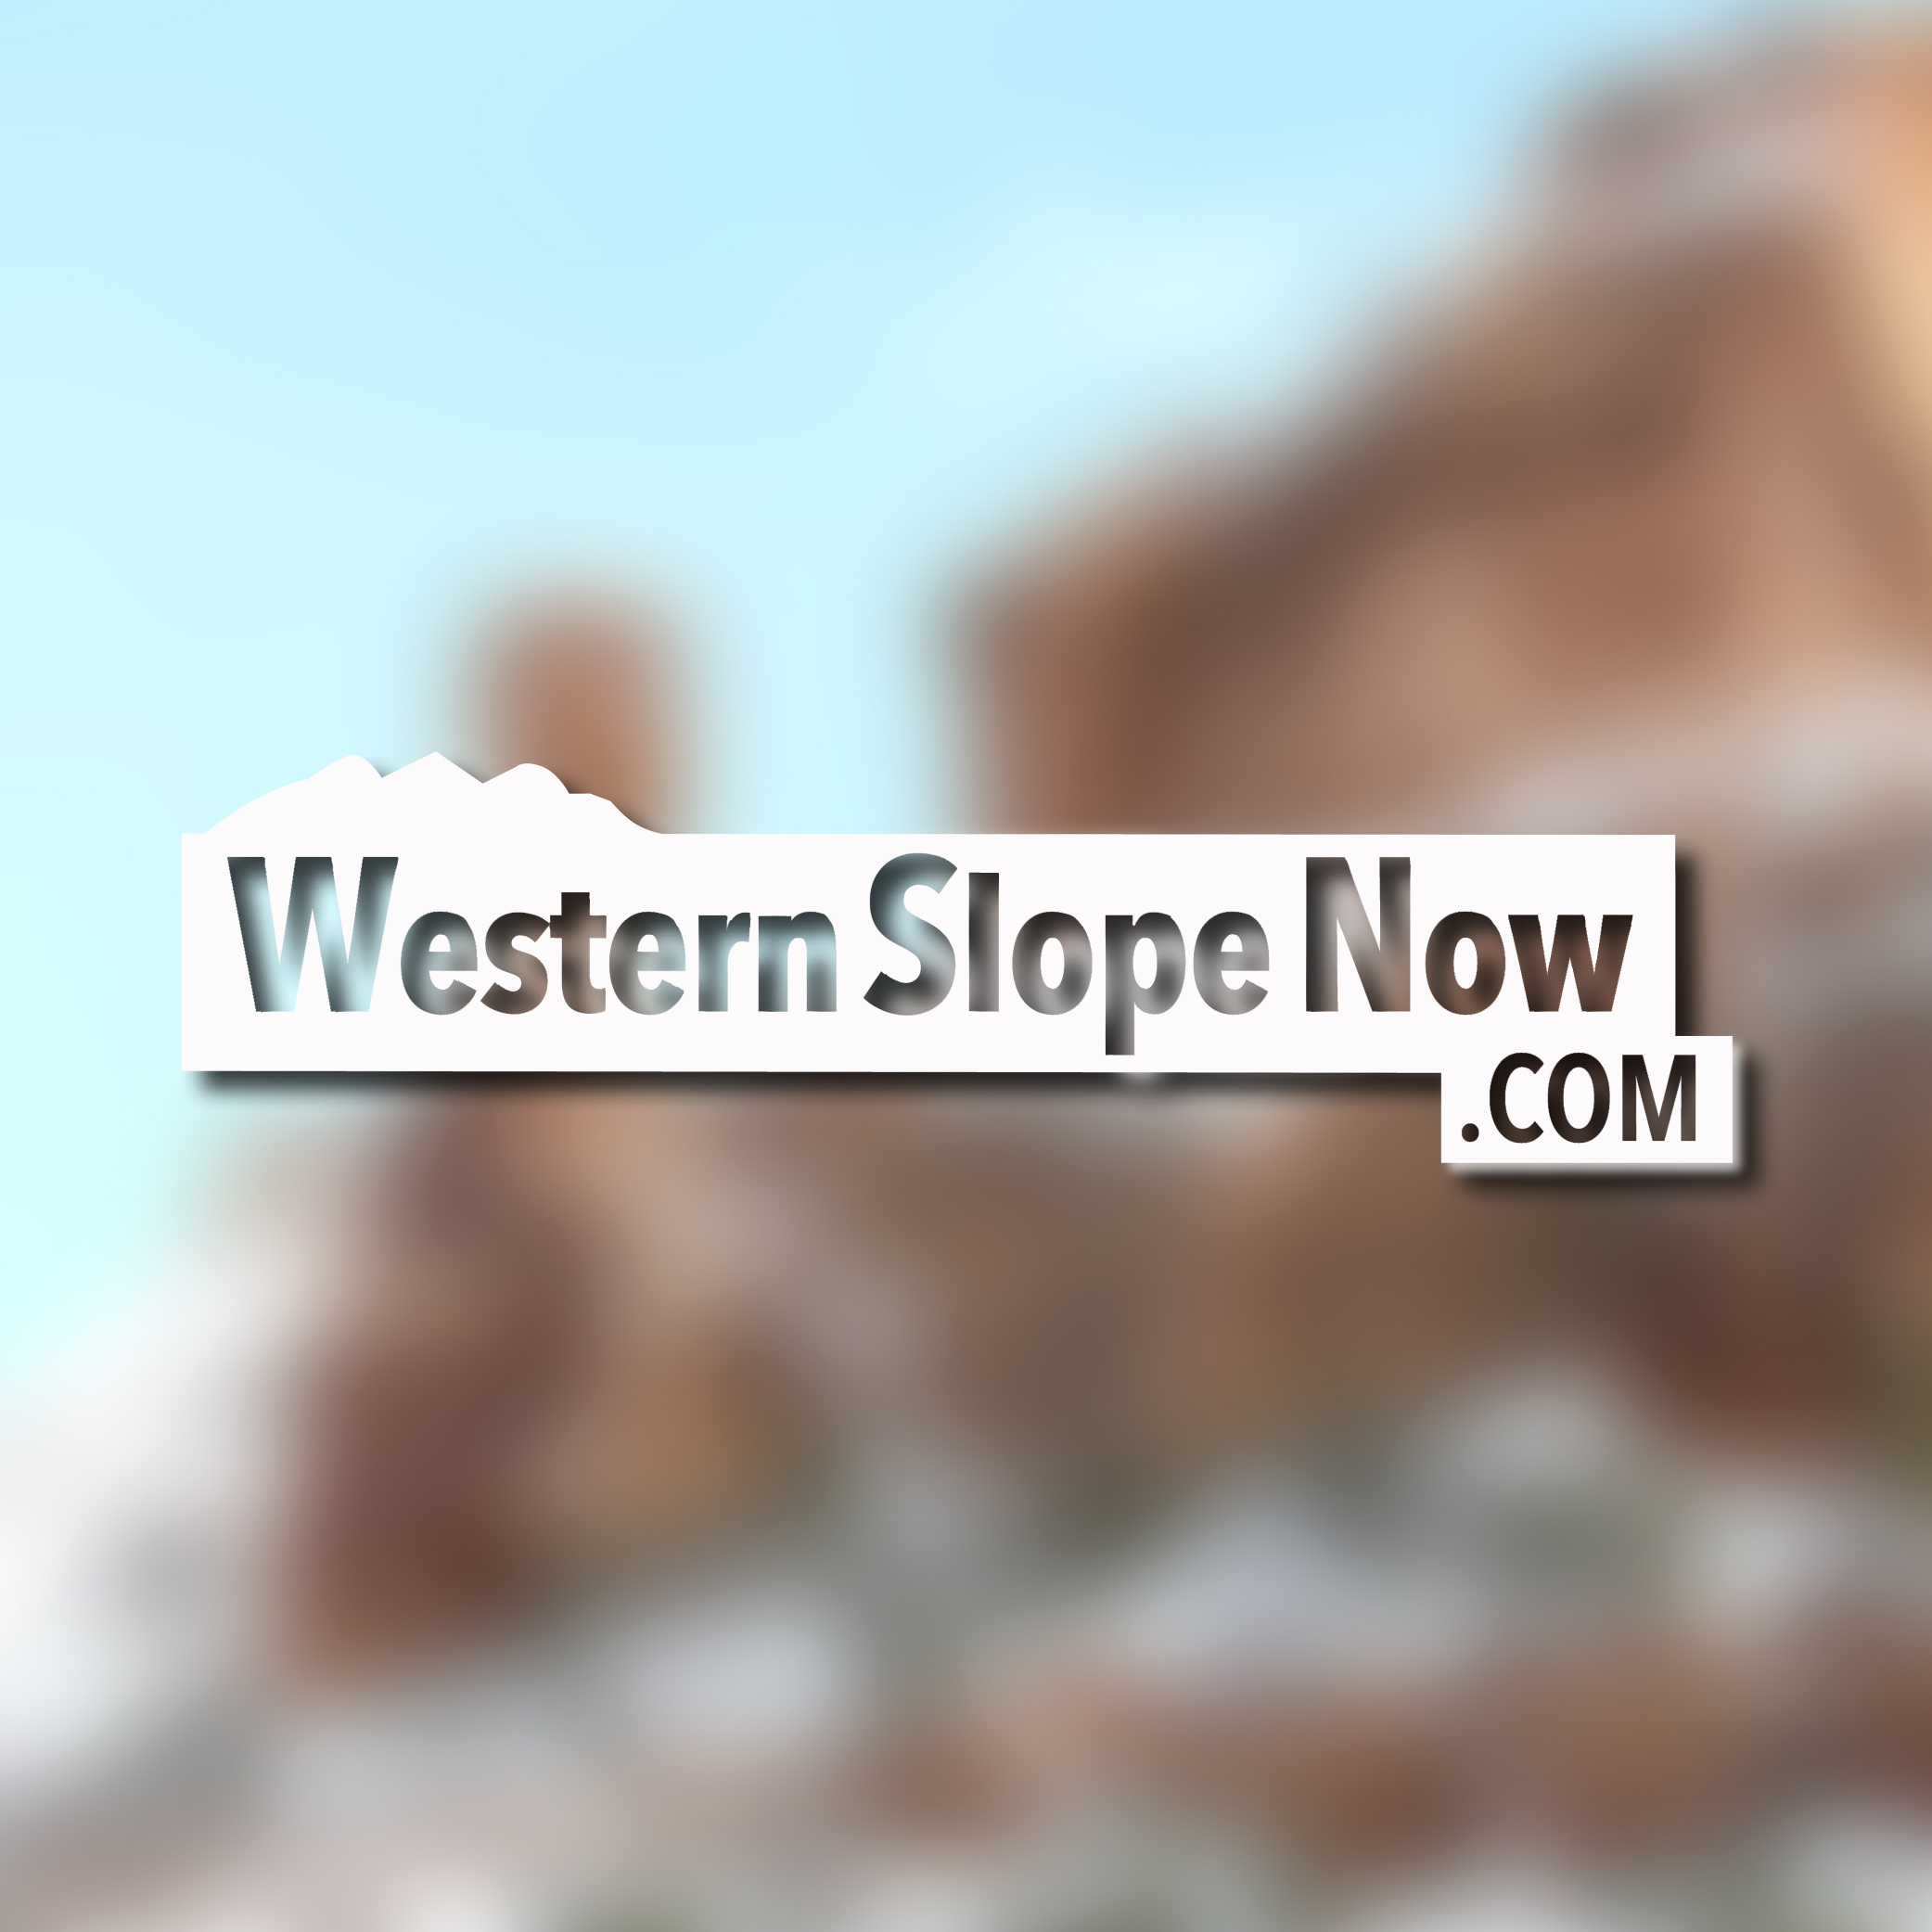 Western Slope Now